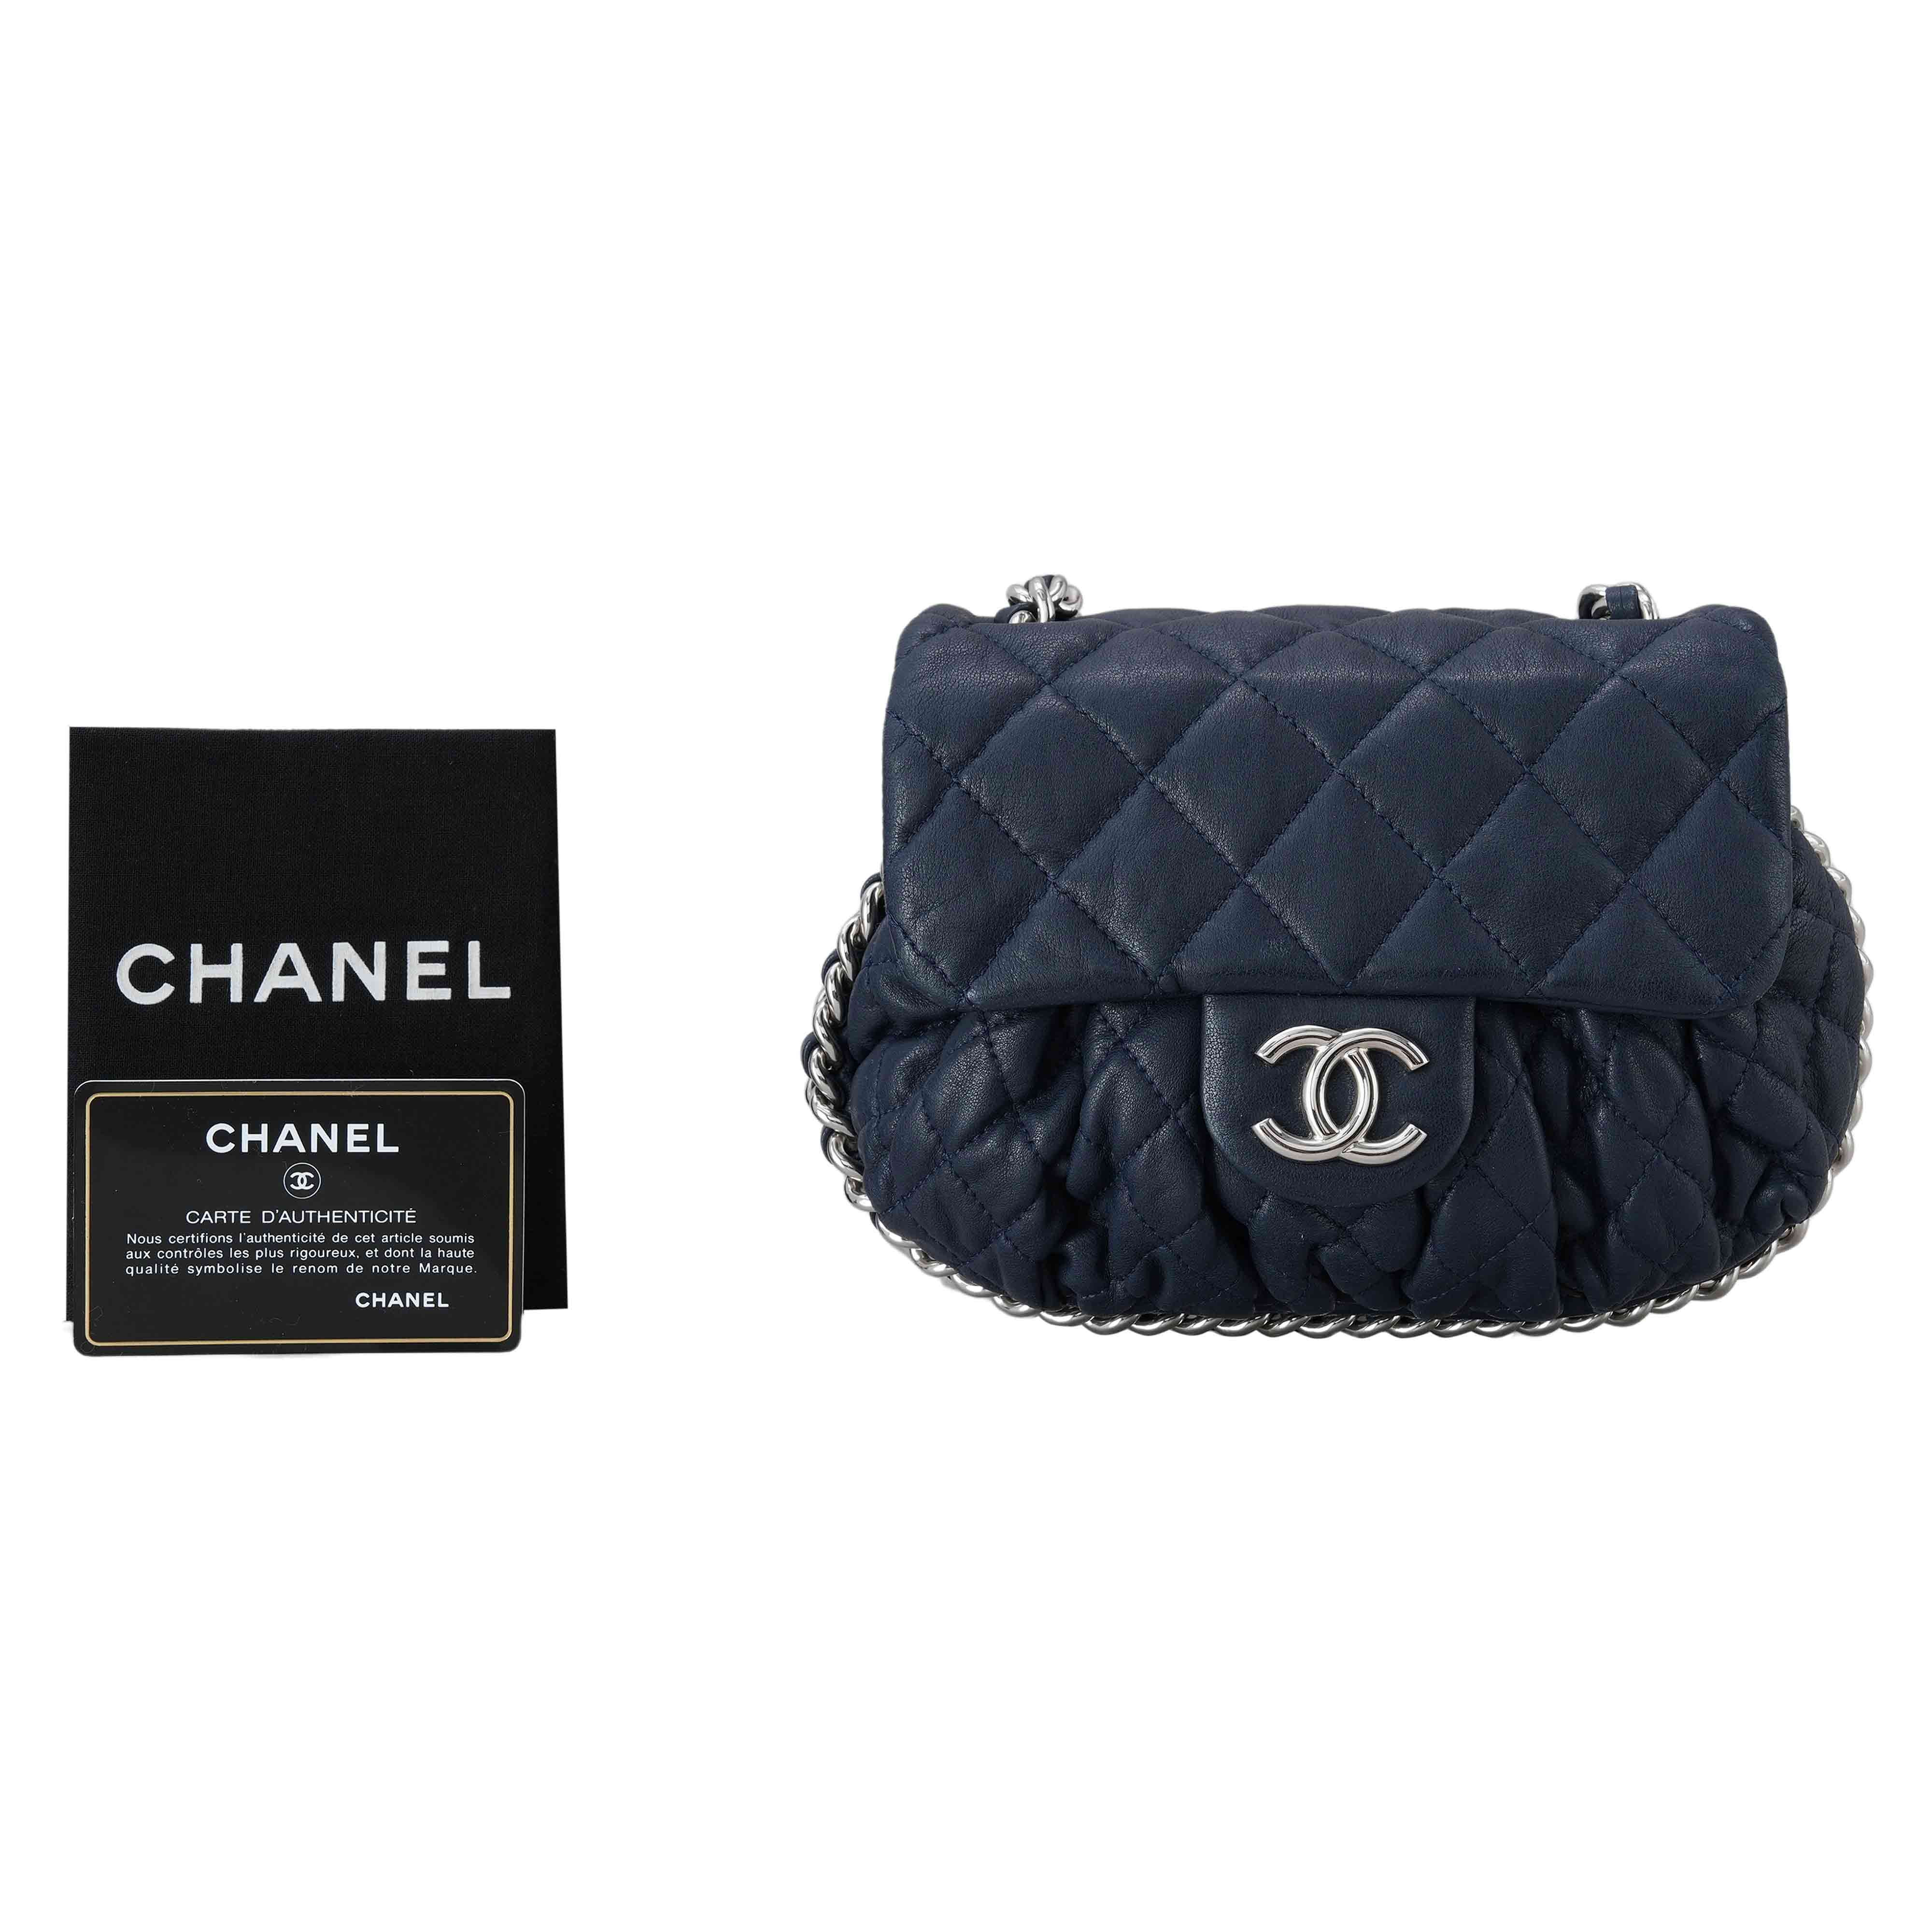 Buy authentic pre-owned Chanel SELLUXURY international marketplace